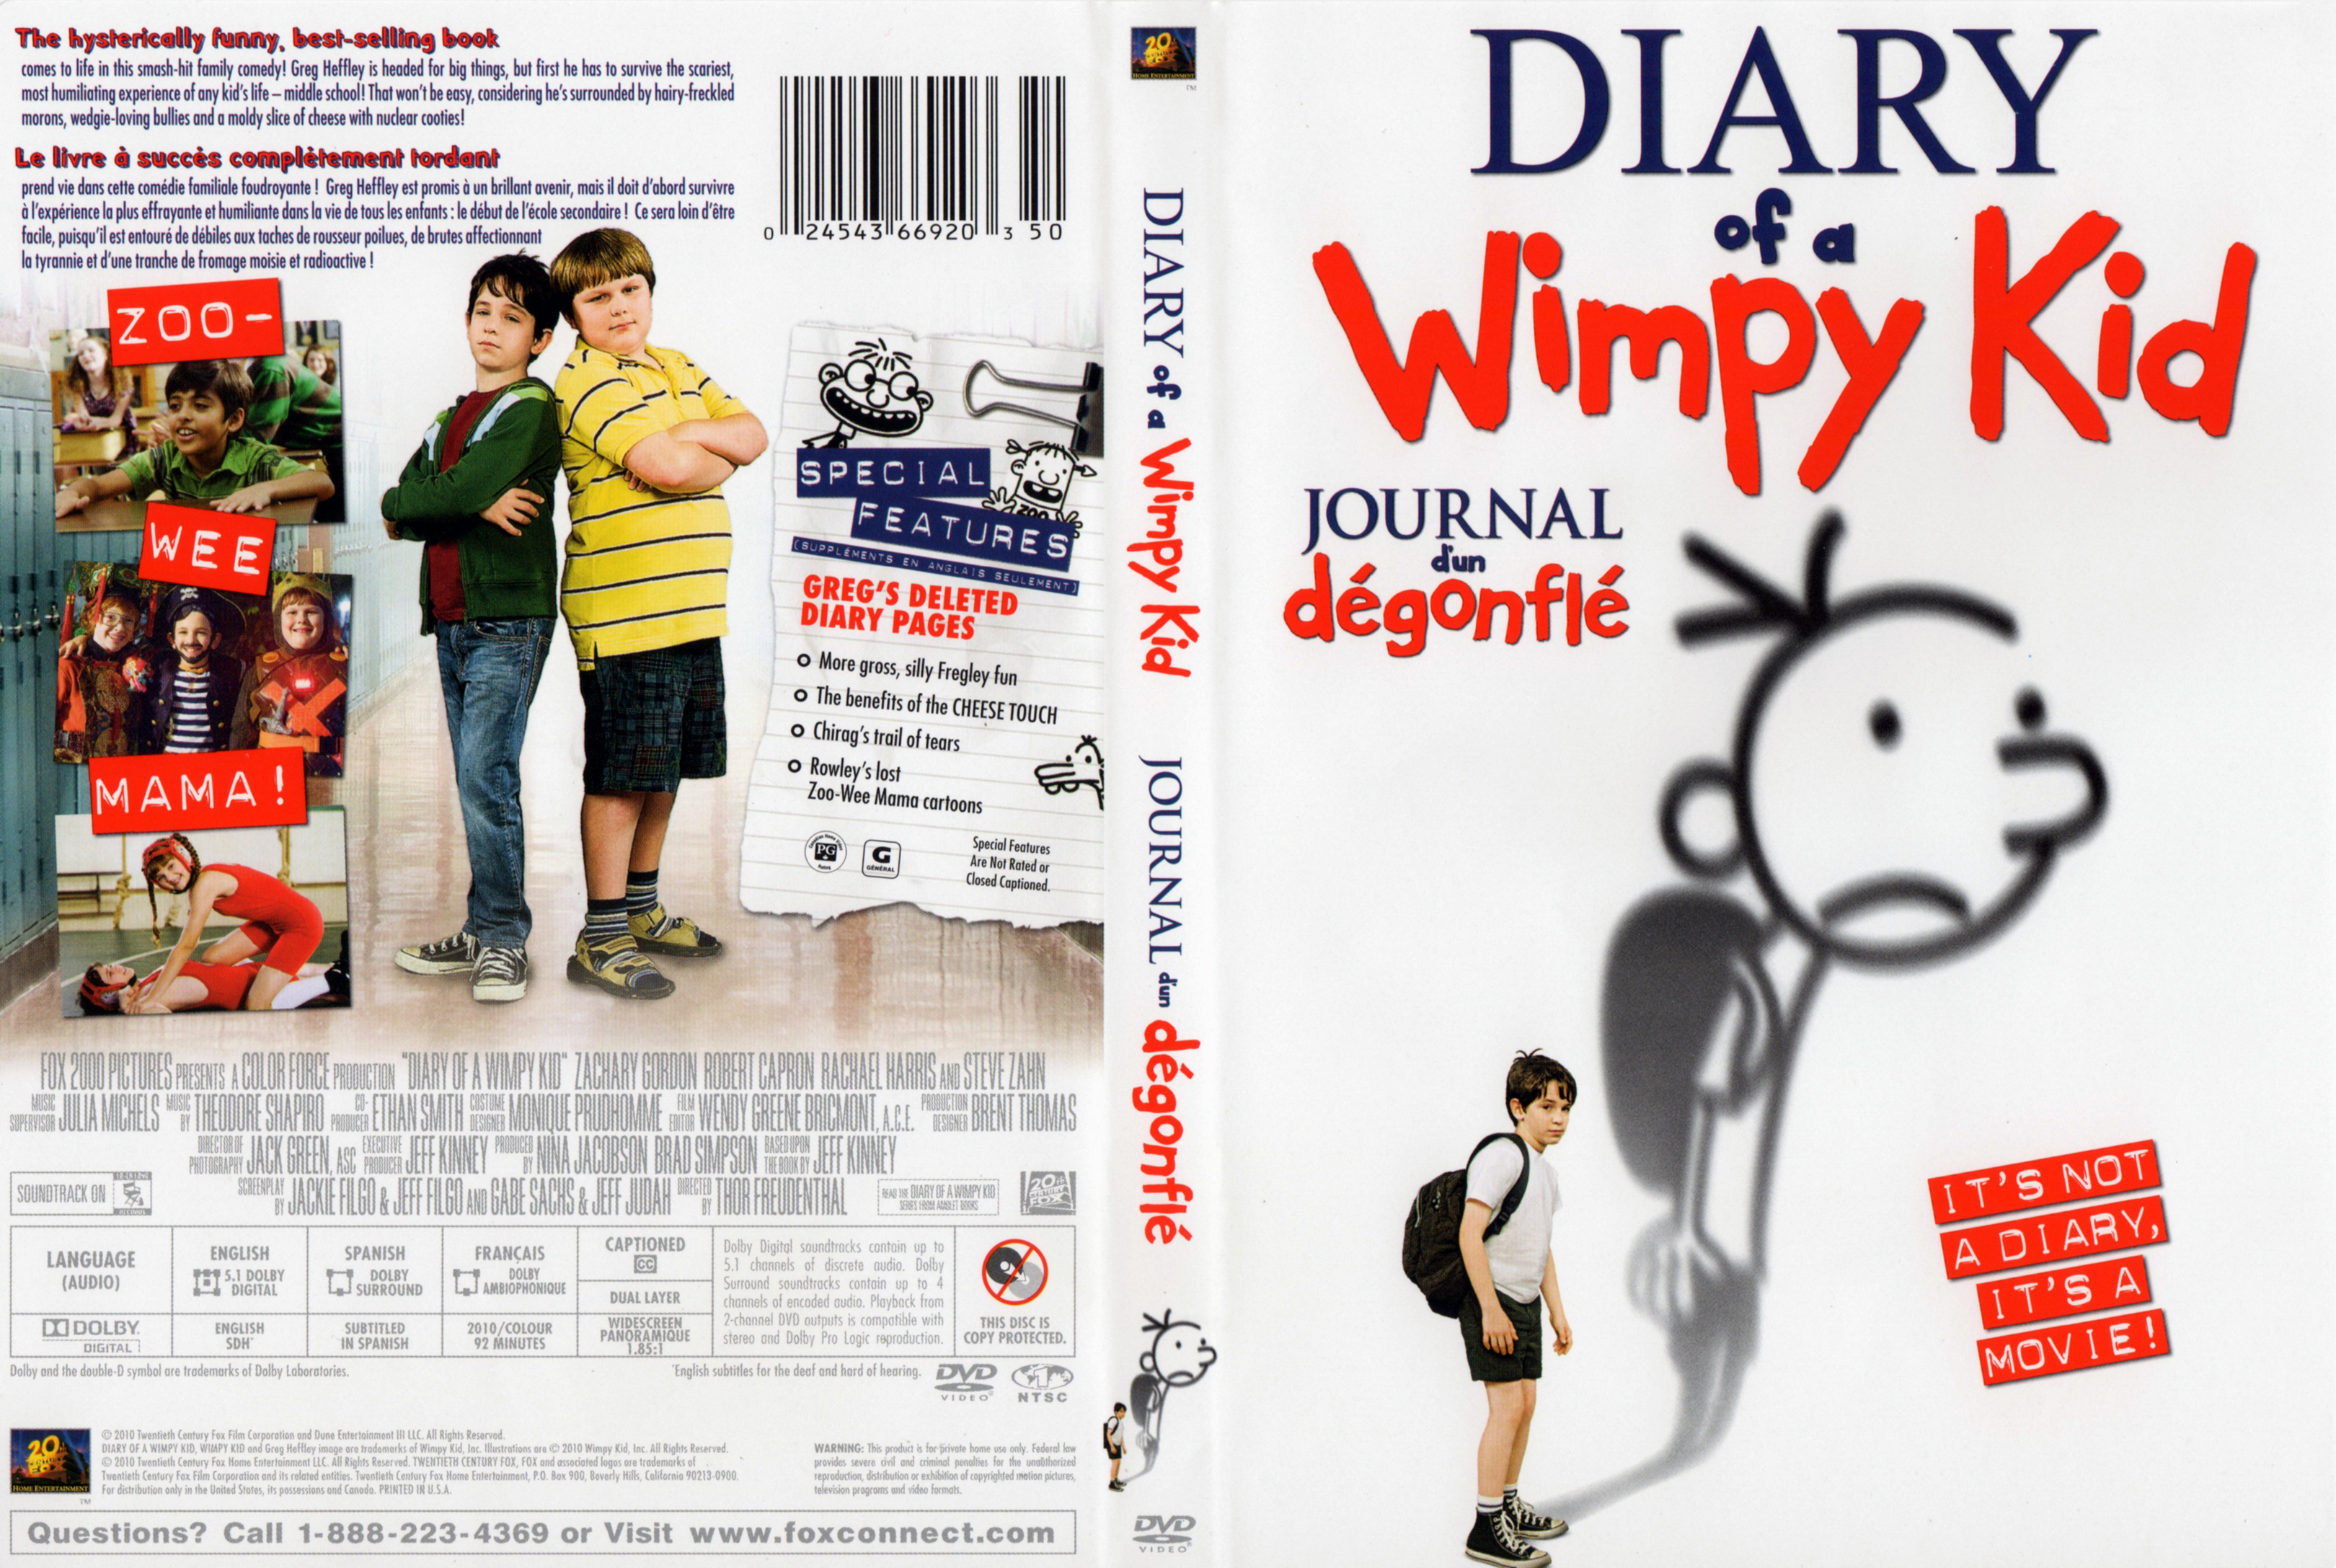 Jaquette DVD Diary of a wimpy kid - Journal d